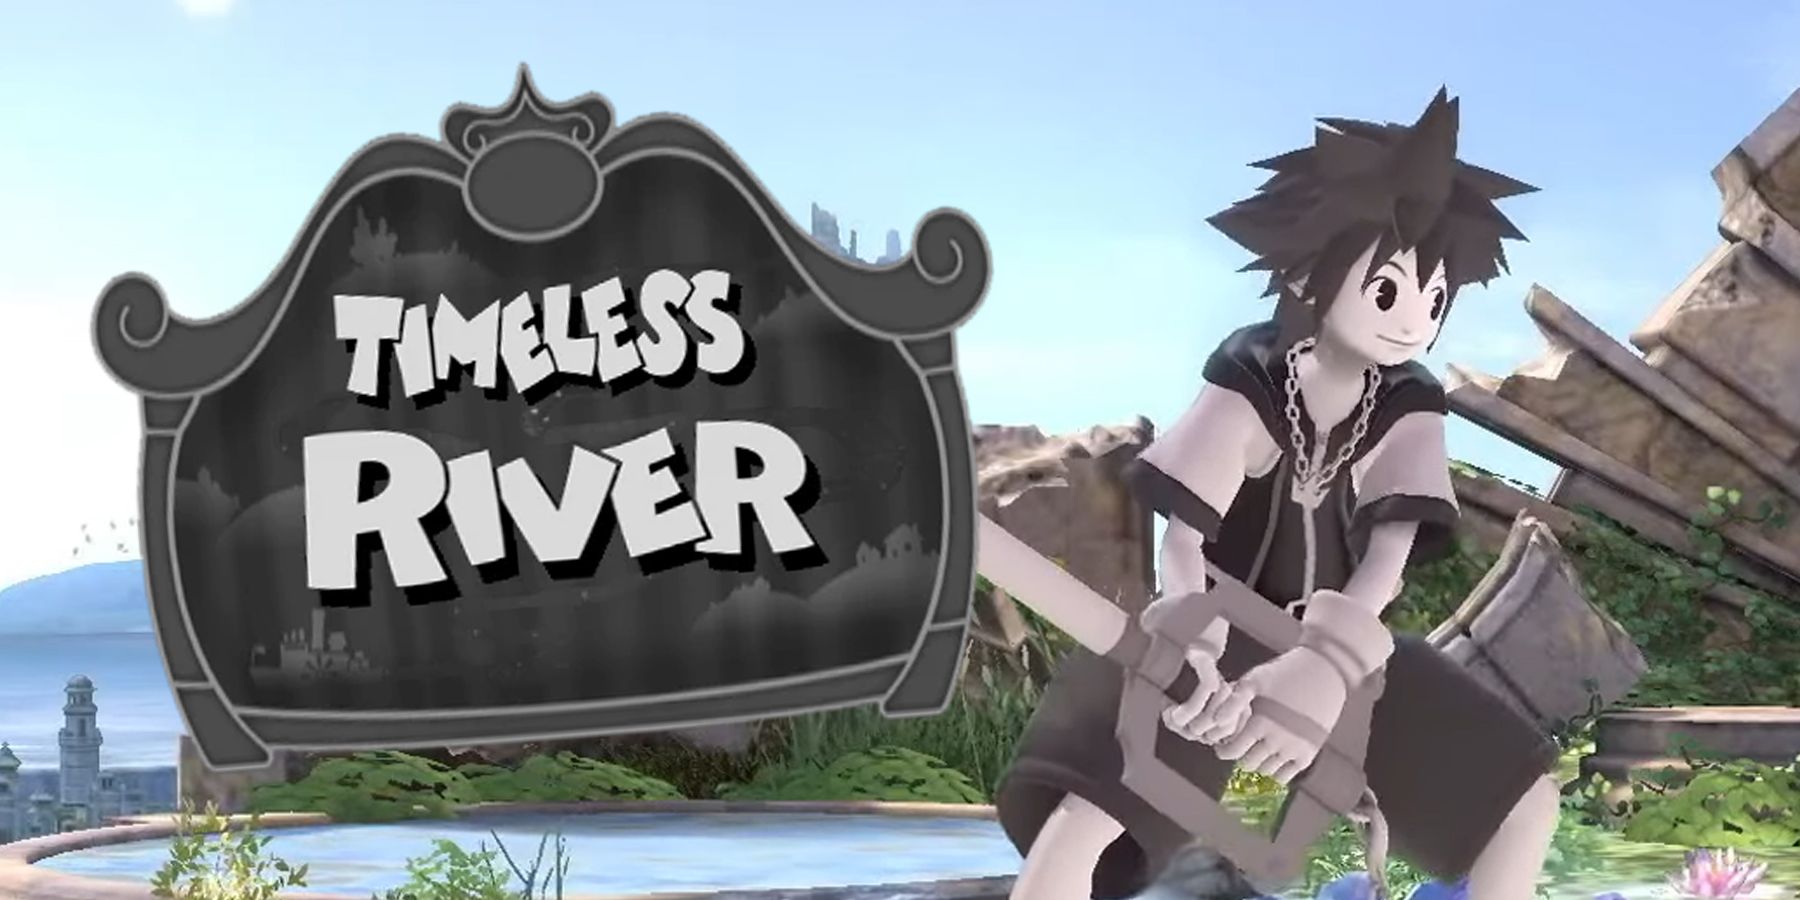 Sora and his Timeless River design as it appears in Super Smash Bros. Ultimate next to the Timeless River world's logo.